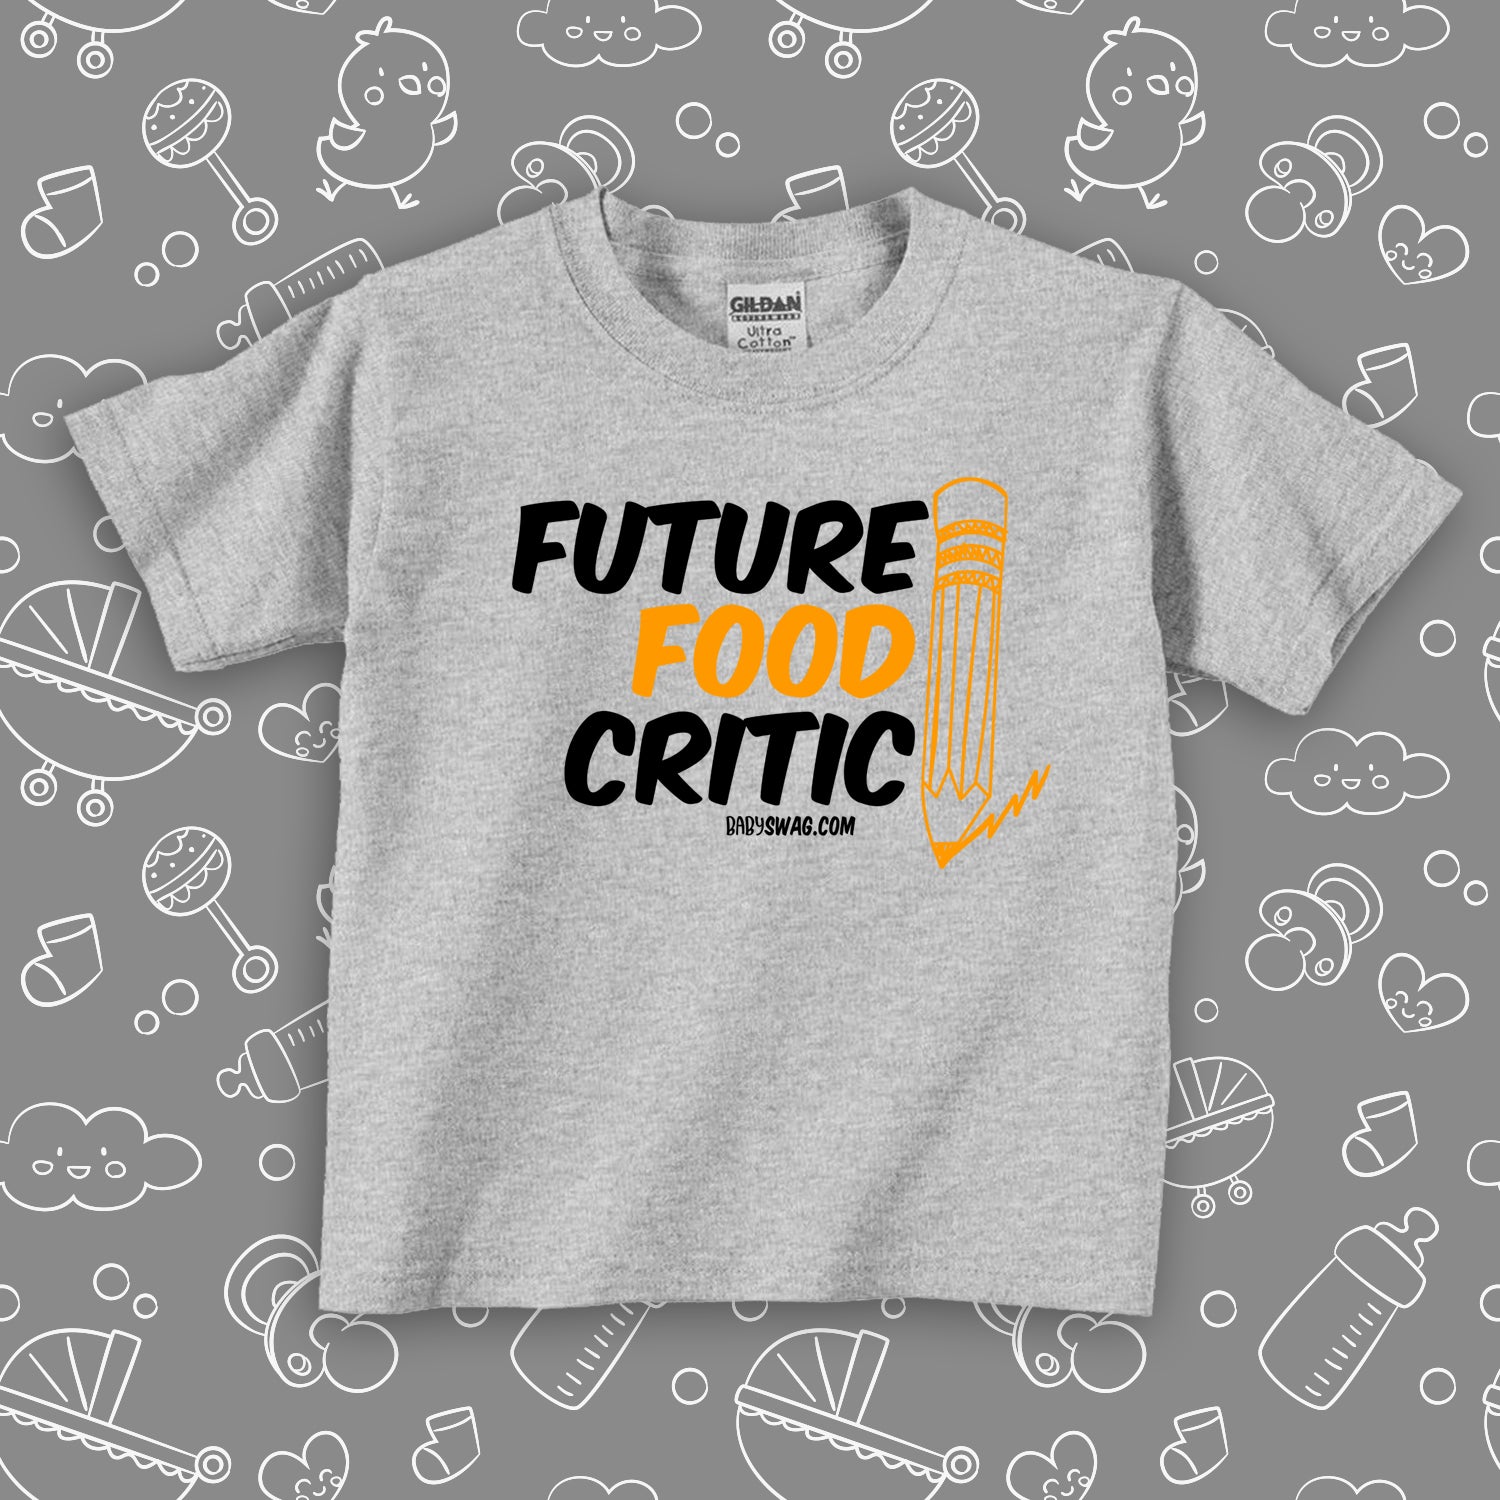 White funny toddler graphic tee saying "Future Food Critic", color grey.